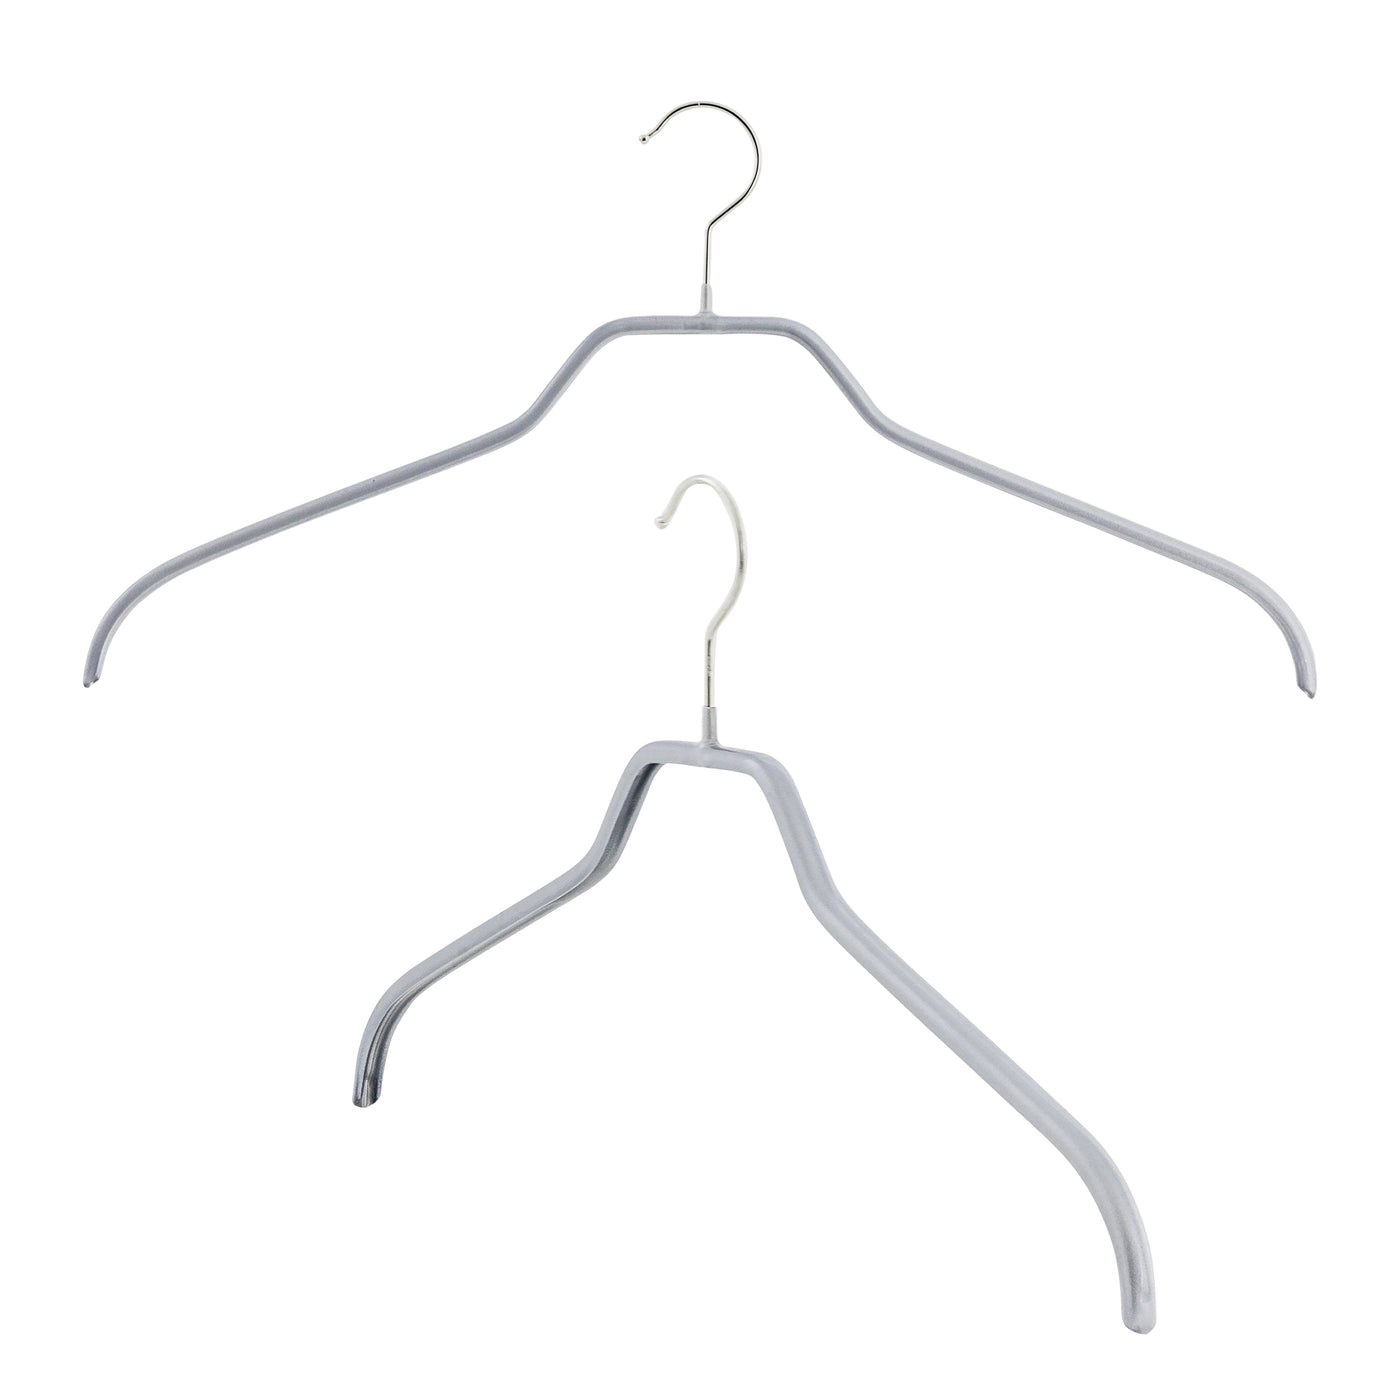 Silhouette, 41-F, Hanger, Silver Qty: 2